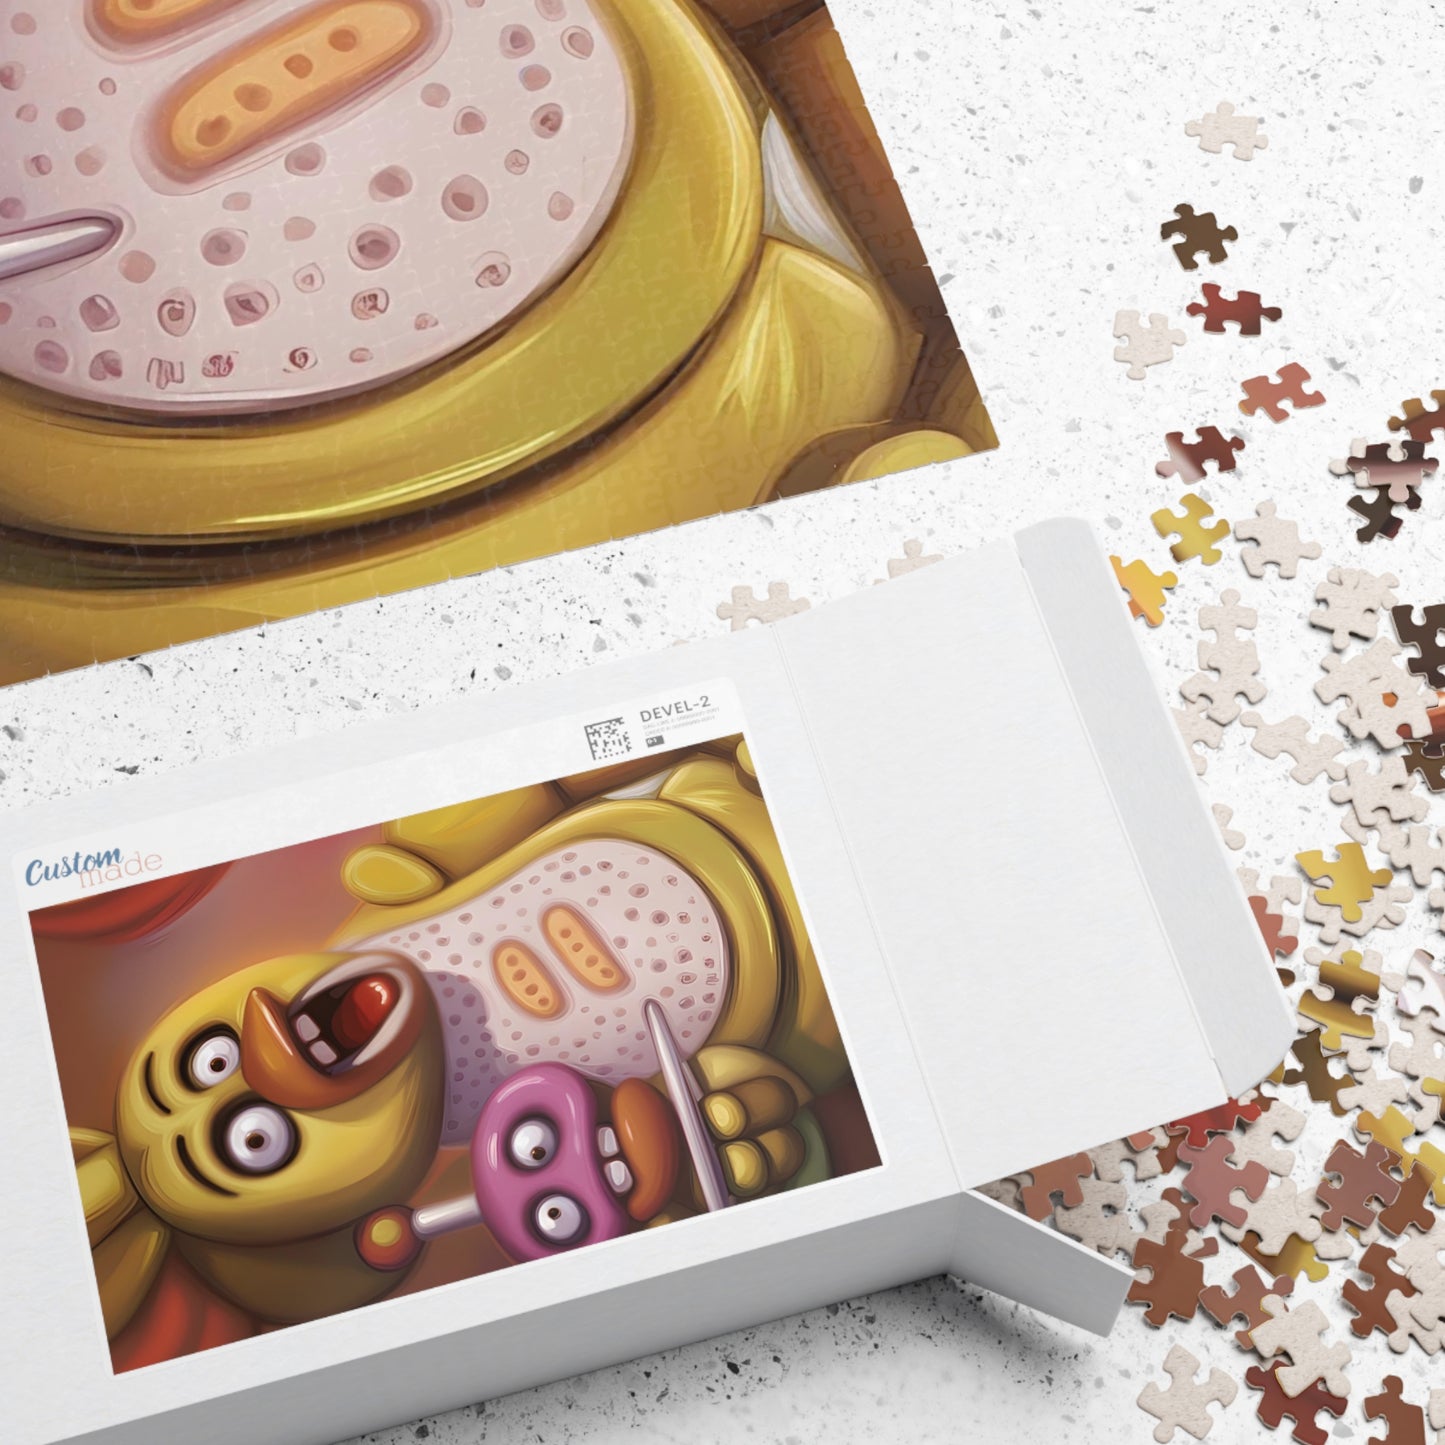 Five Nights at Freddy's Puzzle (110, 252, 520, 1014-piece)